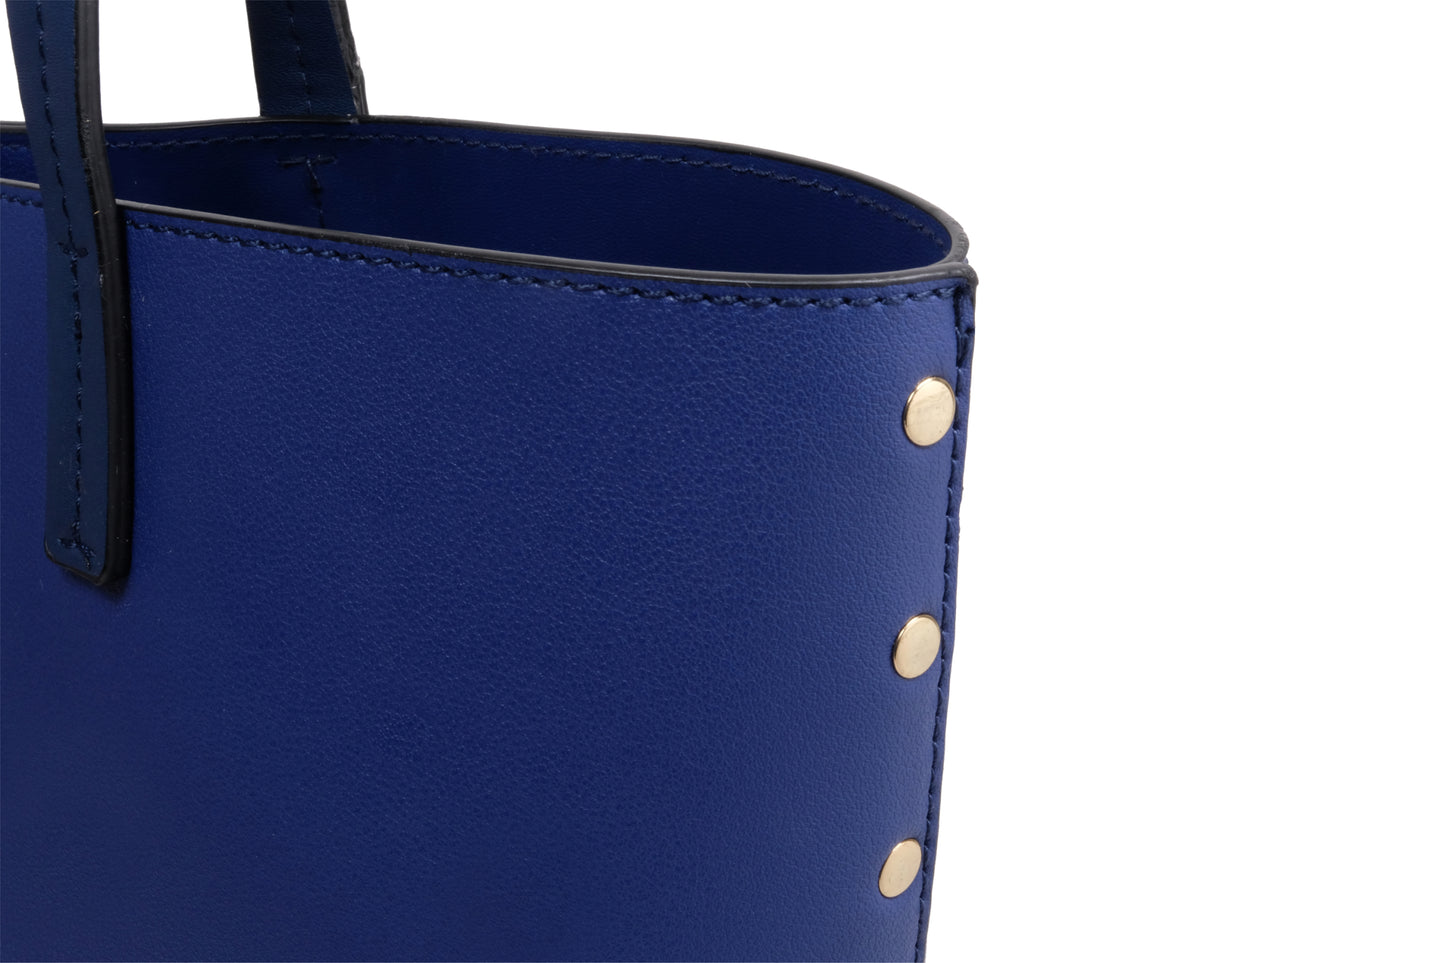 Rowi Pebble Grain Faux Leather Twilight Blue Tote Bag Handbag made by Dewi Maya gold rivets available at the best boutique in Upstate South Carolina Spartanburg Greenville Dewi Maya Boutique